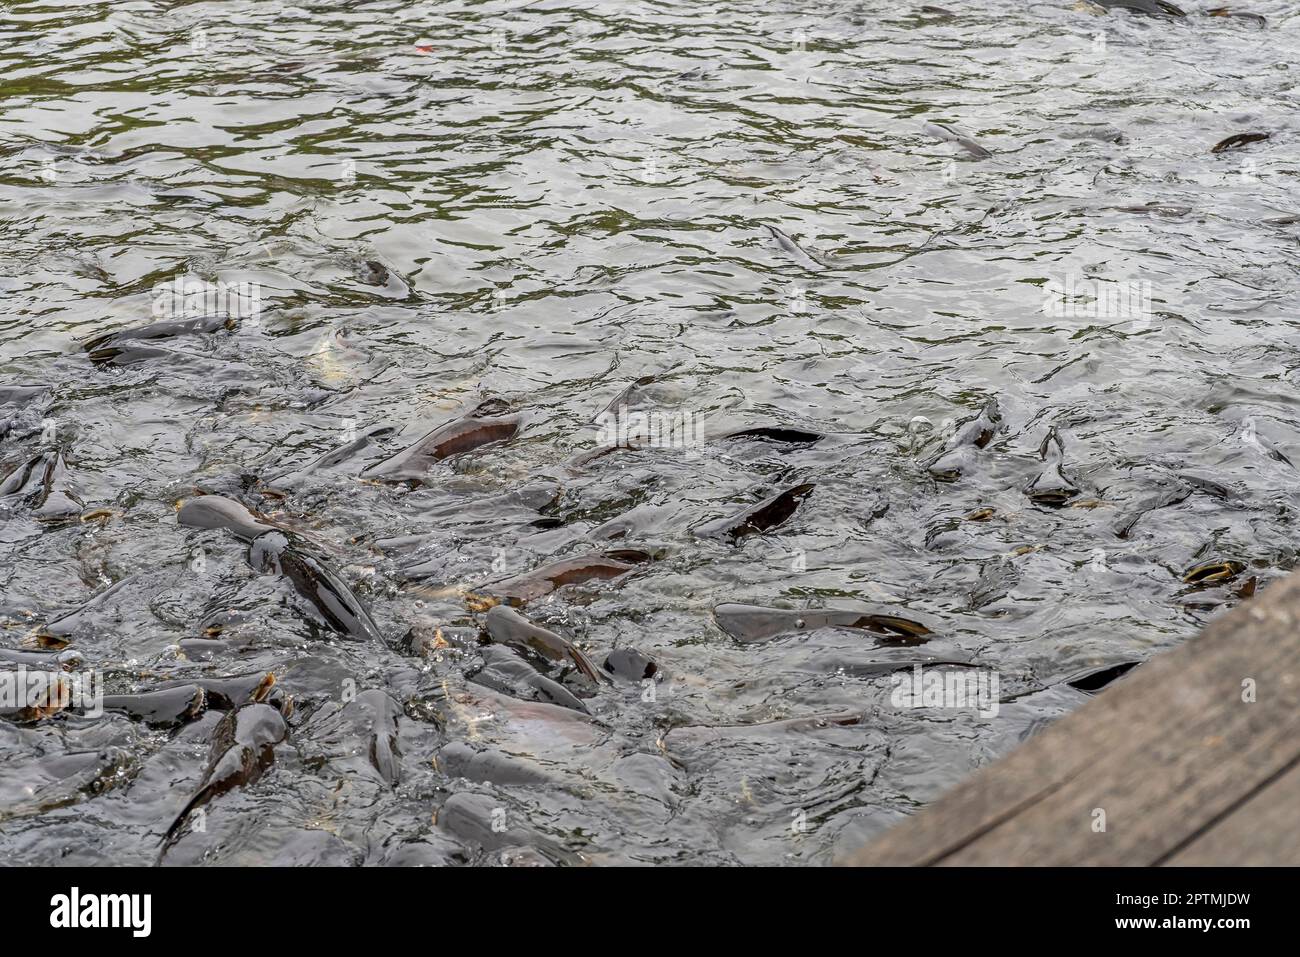 Many fish or freshwater fish in the river Stock Photo